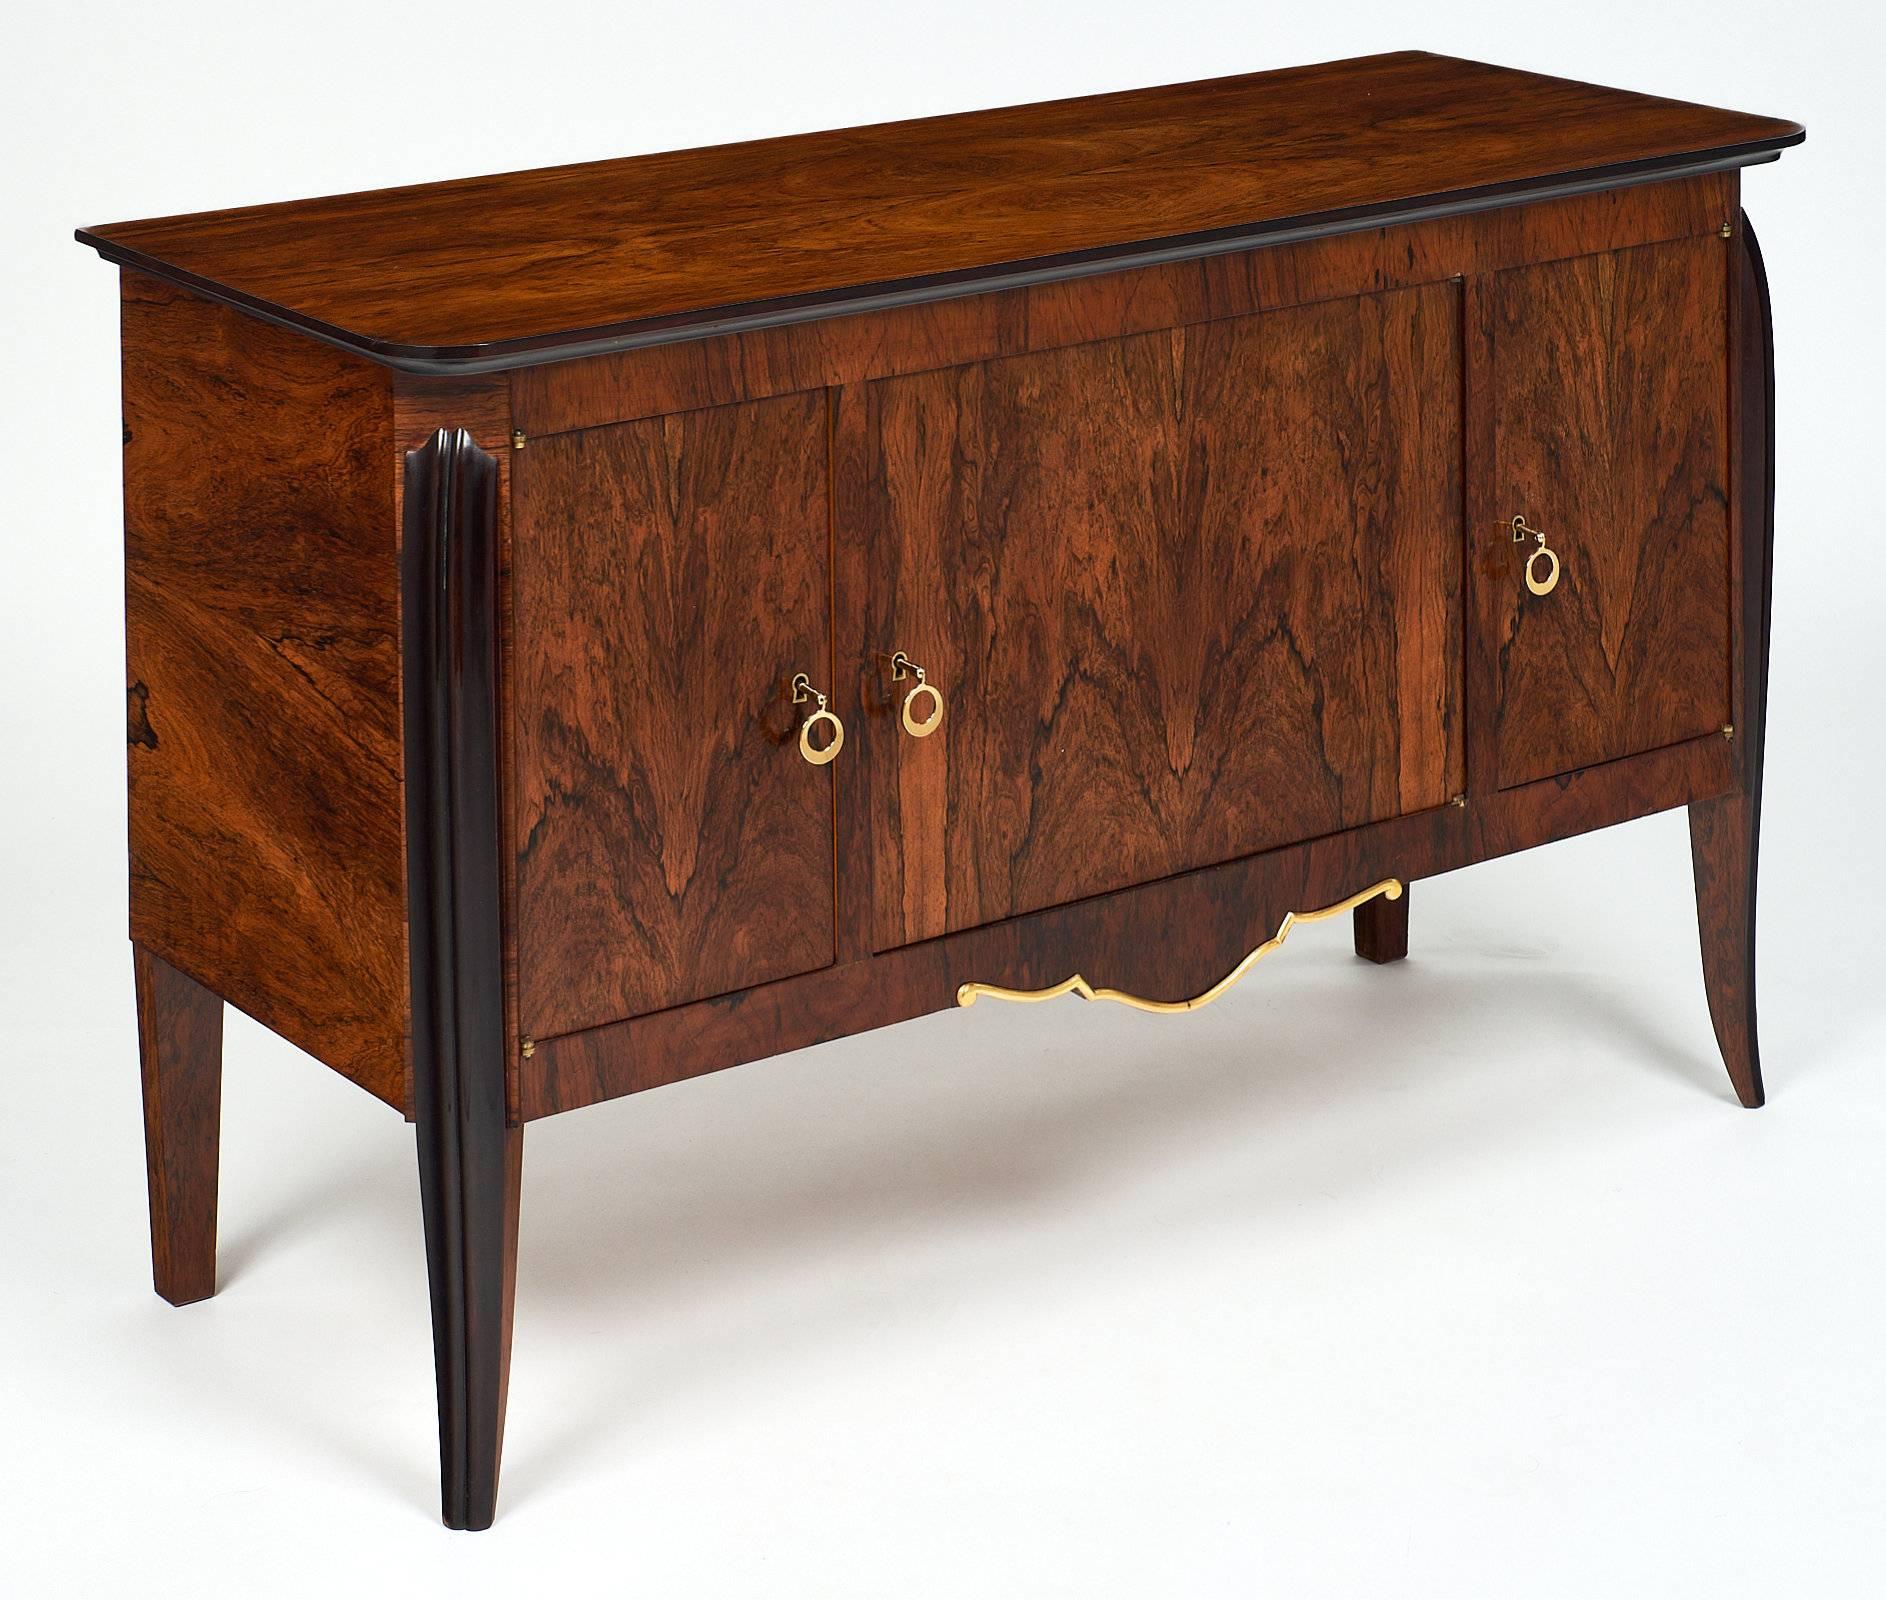 French Art Deco period buffet in the manner of Emile Jacques Ruhlmann. A fine and rare small buffet or credenza of beautiful Brazilian rosewood with intense colors and contrasts. The ebonized curves on the front legs are reminiscent of the iconic